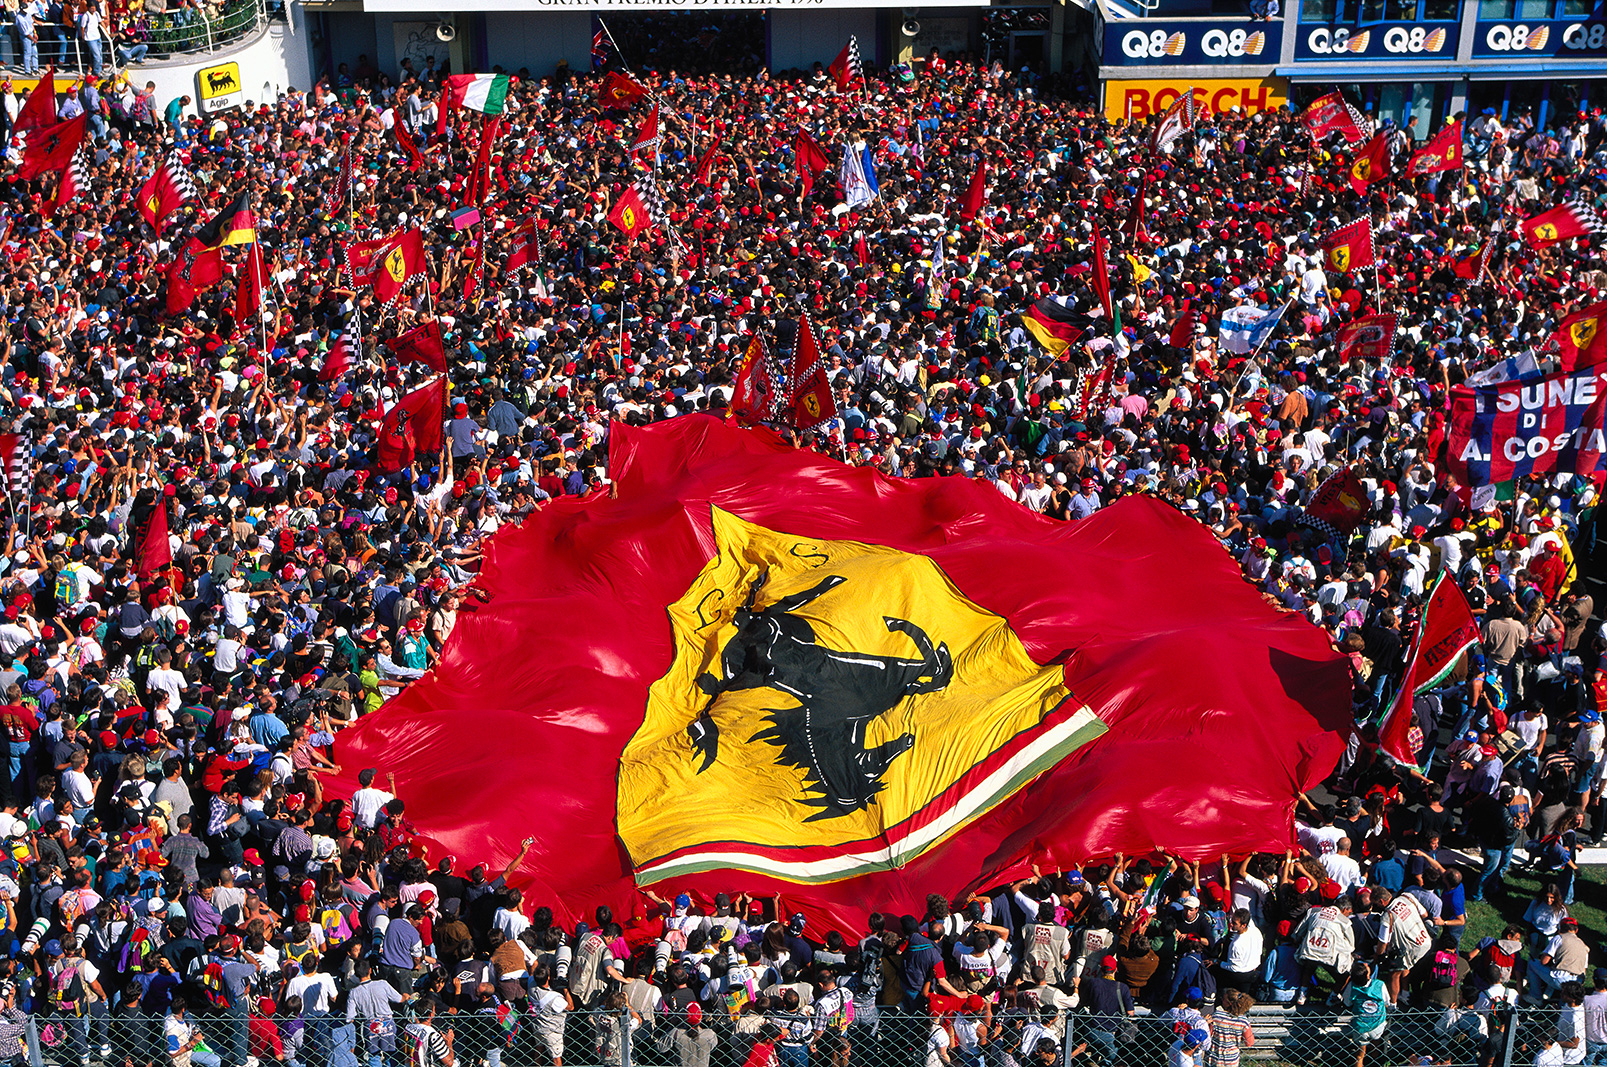 AUTODROMO NAZIONALE MONZA, ITALY - SEPTEMBER 08: The tifosi celebrate in front of the podium with a large Ferrari flag after Michael Schumacher's victory during the Italian GP at Autodromo Nazionale Monza on September 08, 1996 in Autodromo Nazionale Monza, Italy.